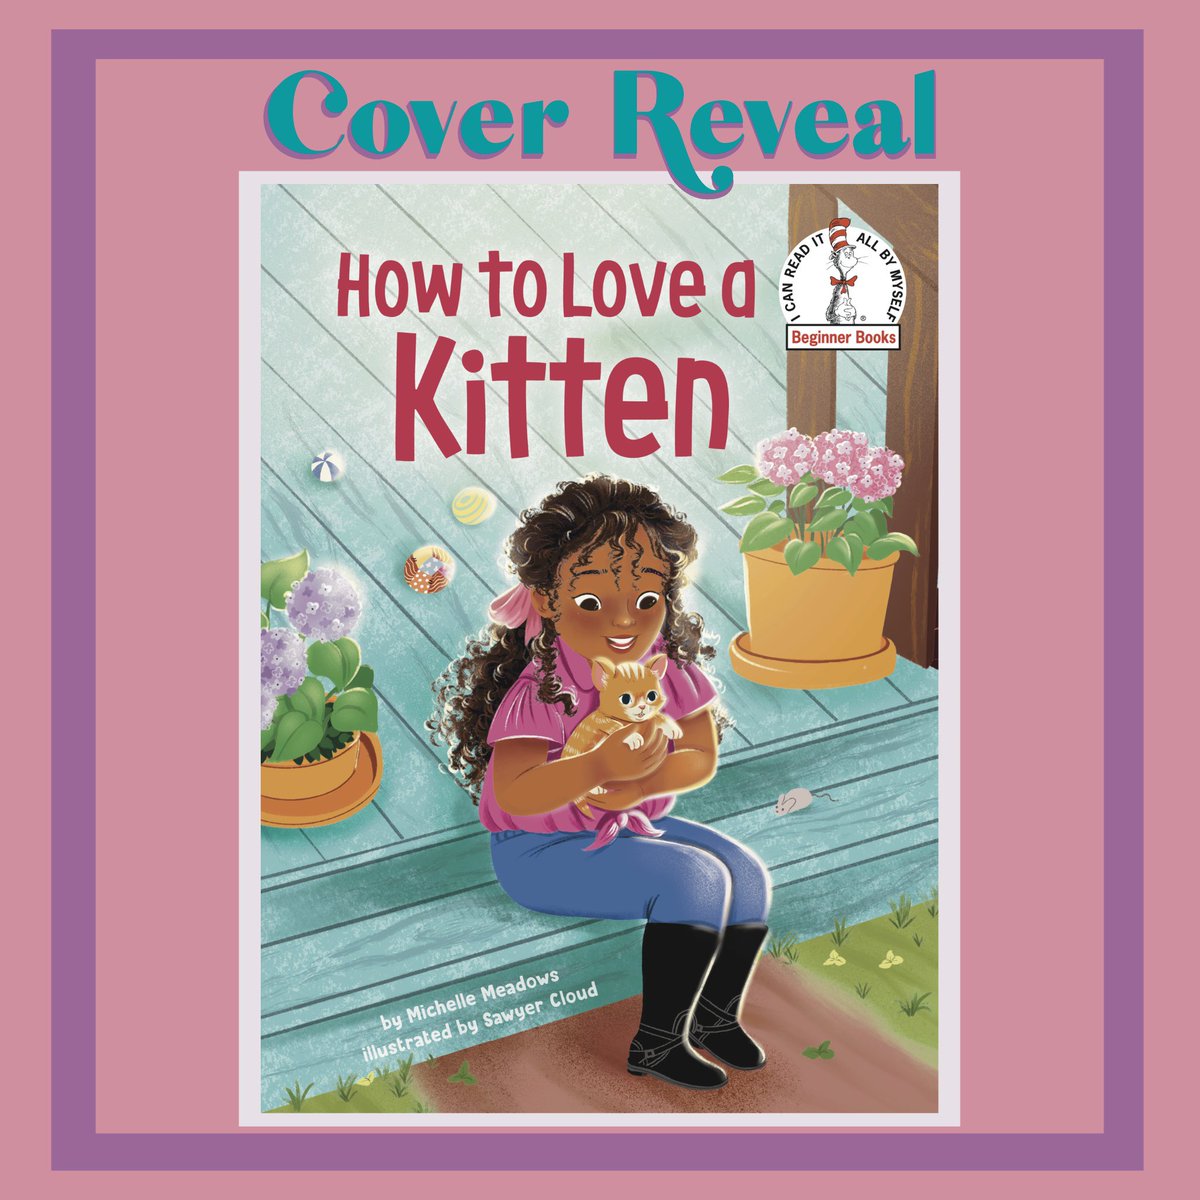 ✨Cover reveal✨ So happy to share my next book« How To Love A Kitten »coming on May 07th. Thanks to the amazing author @MMeadowsBooks ,our publisher @penguinrandom and my lovely agency @advocateart01 for this lovely project 💛 #begginerbooks #coverreveal #kidlit #childrensbook